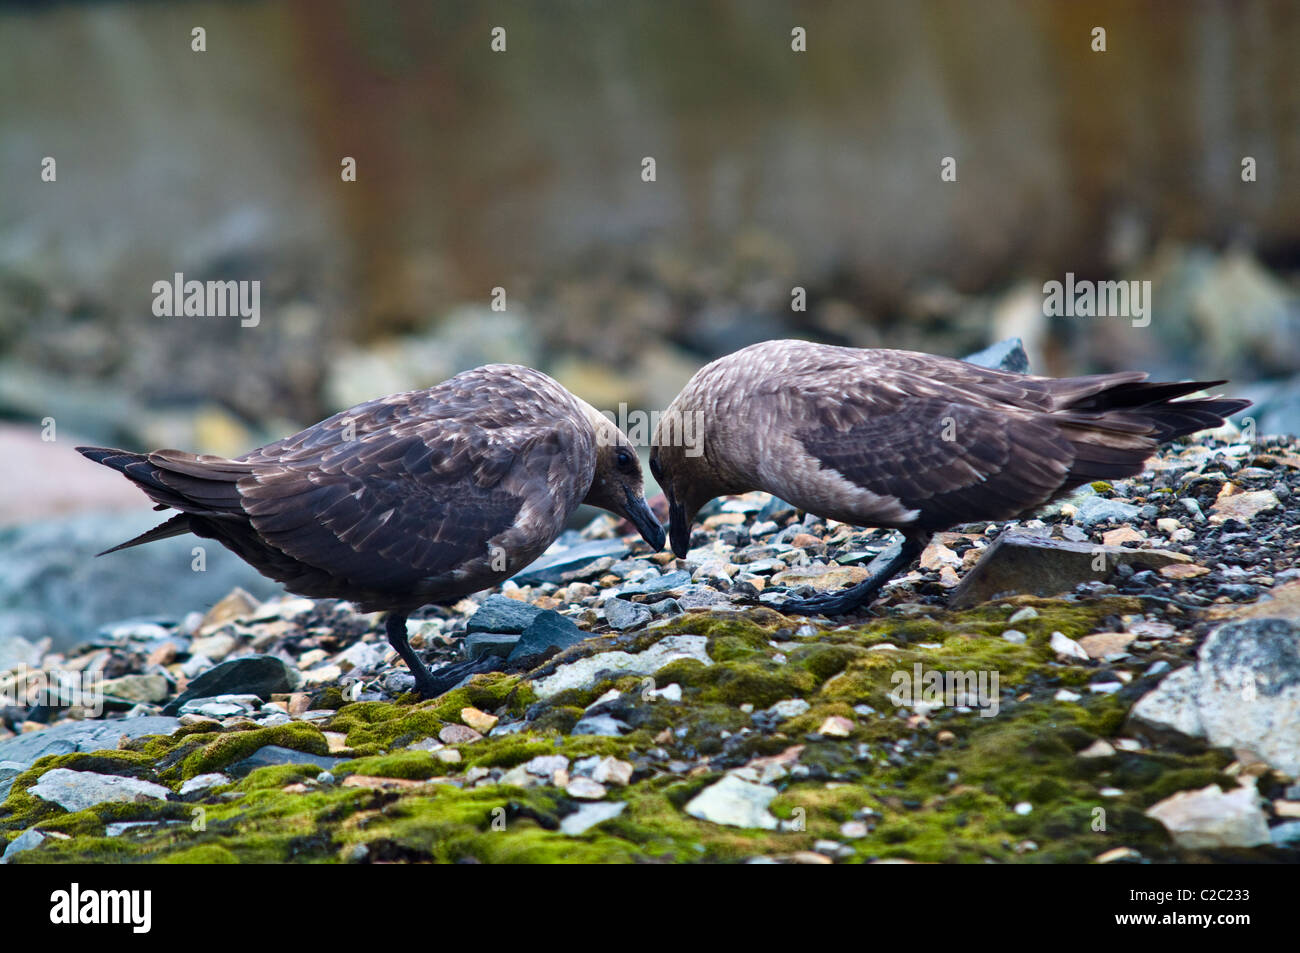 A mating courtship dance between two Brown Skua on a rocky island. Stock Photo